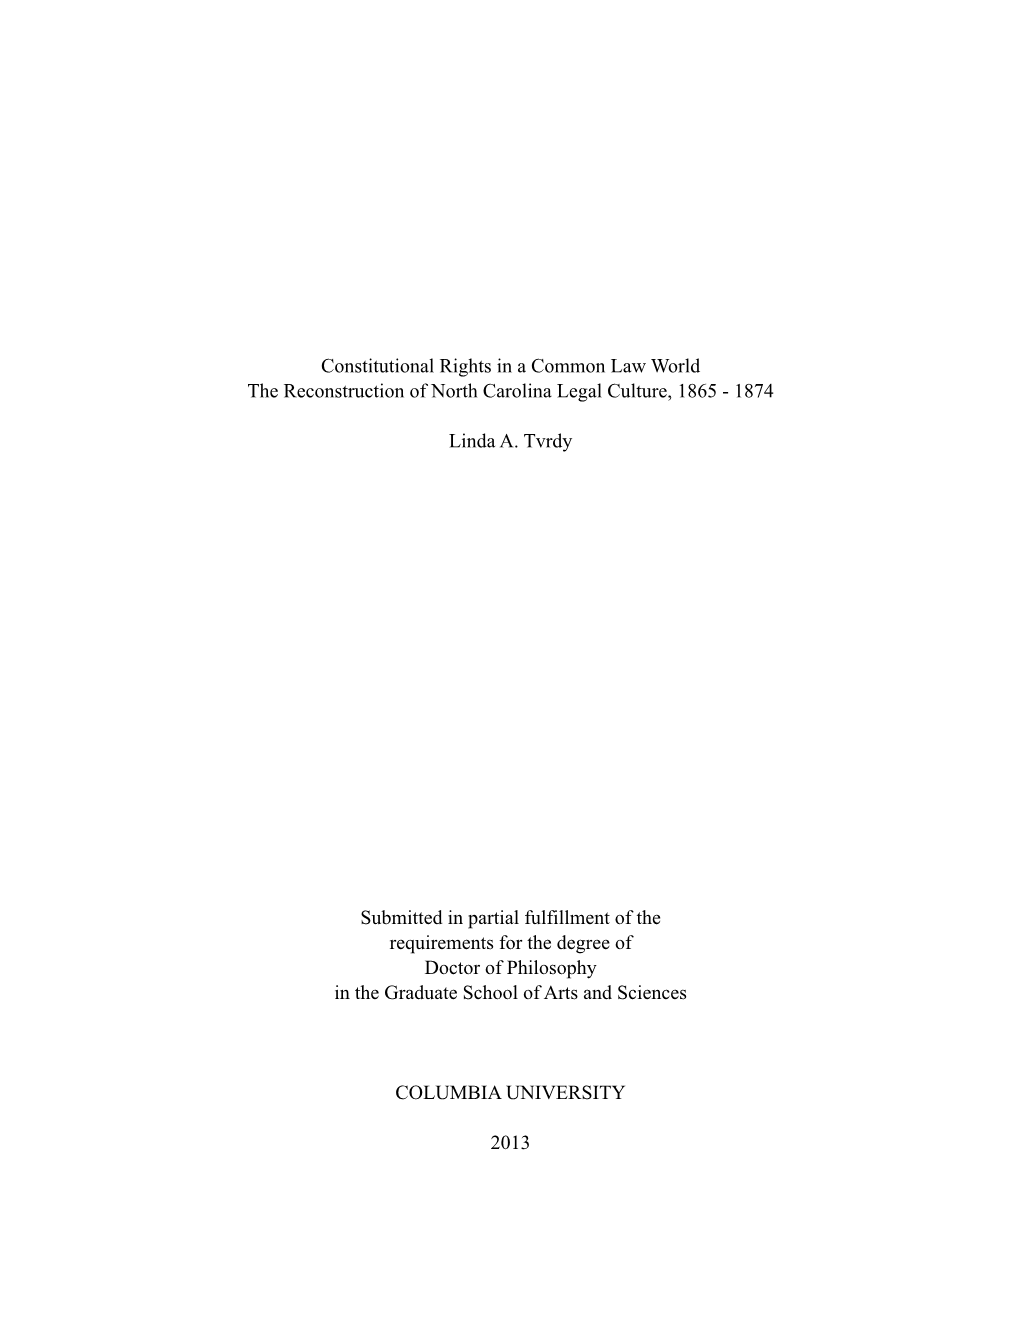 Constitutional Rights in a Common Law World the Reconstruction of North Carolina Legal Culture, 1865 - 1874